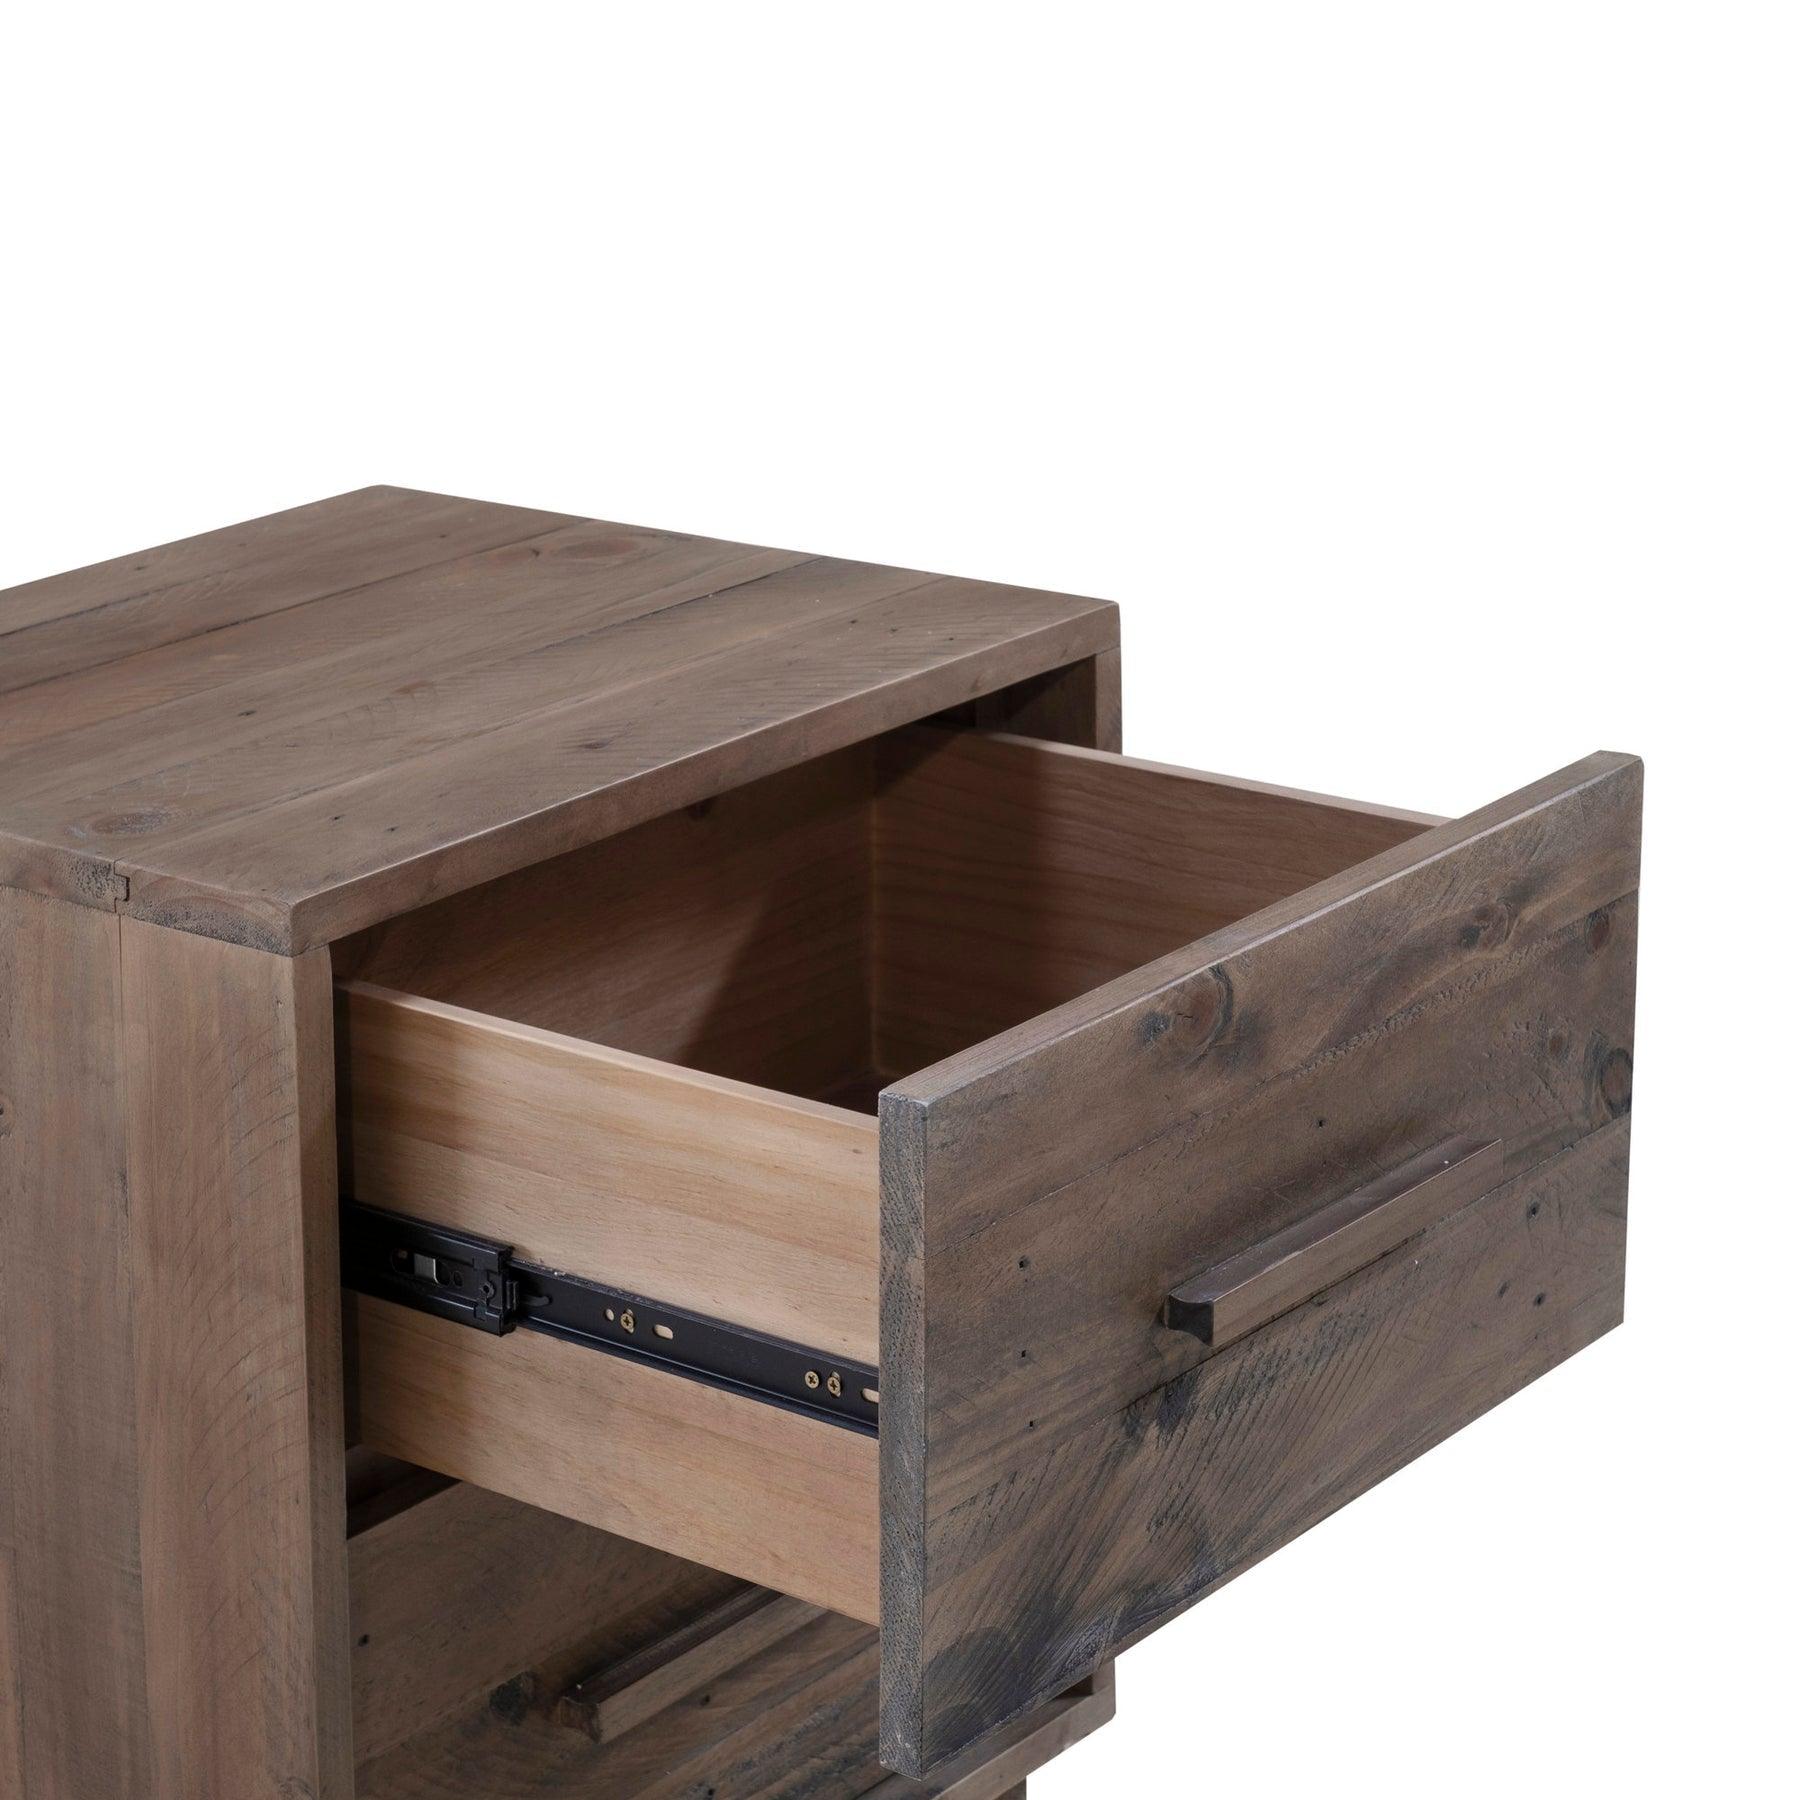 Natural Brown Reclaimed Solid Wood Frame Nevada Nightstand - Sideboards and Things Accents_Natural, Brand_LH Imports, Color_Natural, Features_Repurposed Materials, Finish_Distressed, Finish_Natural, Finish_Rustic, Materials_Reclaimed Wood, Materials_Wood, Nightstands, Wood Species_Pine